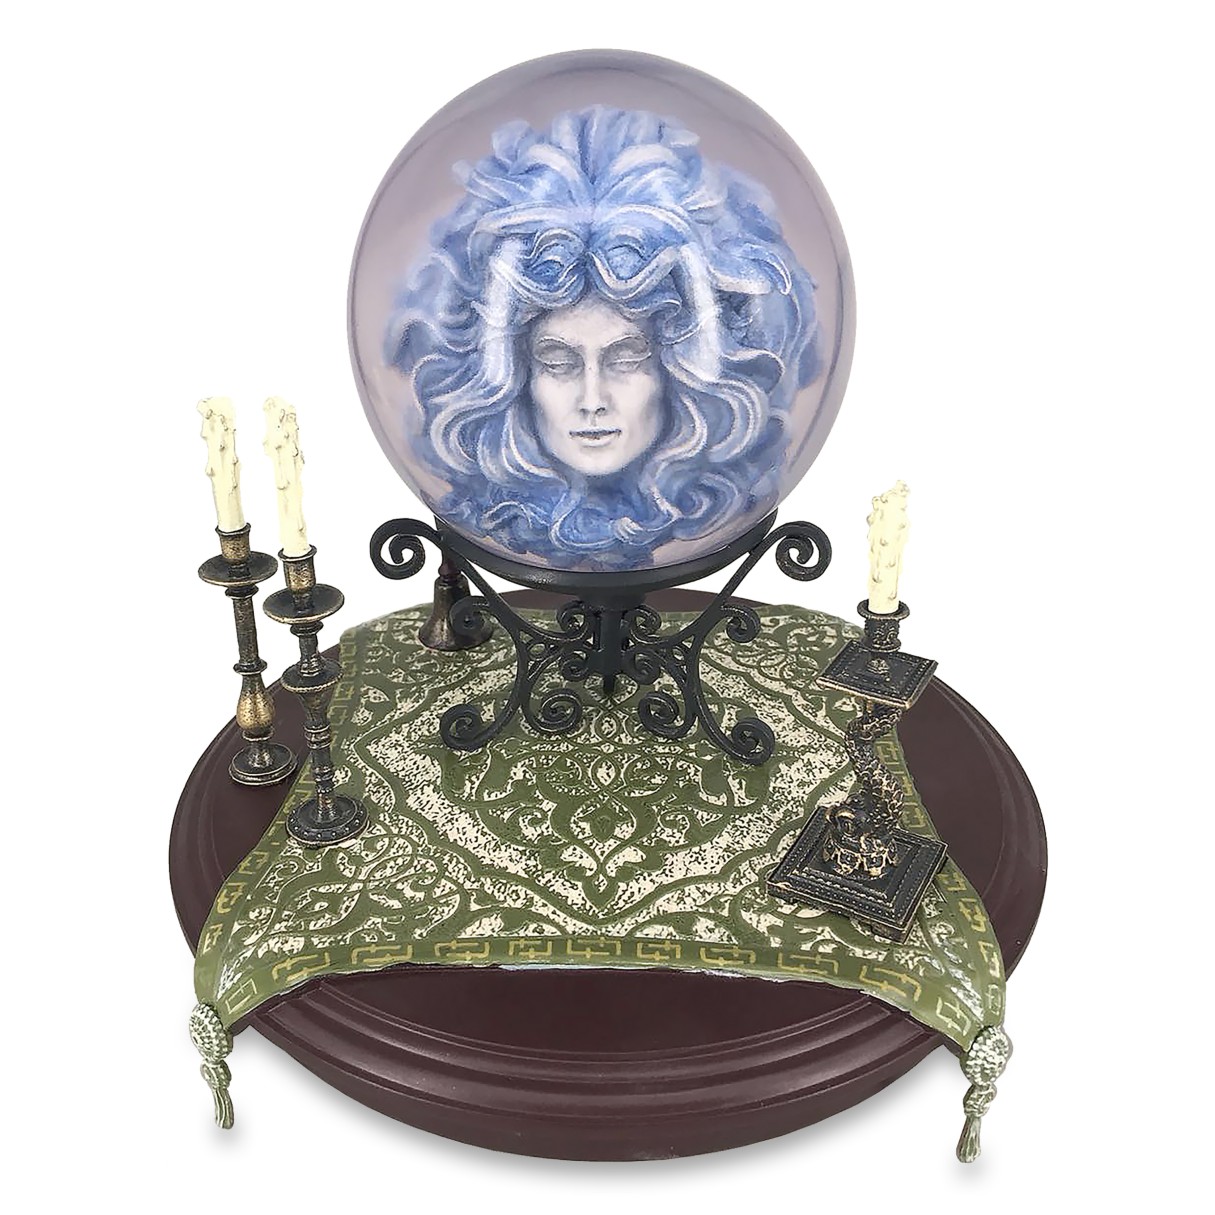 Madame Leota Figurine with Crystal Ball – The Haunted Mansion